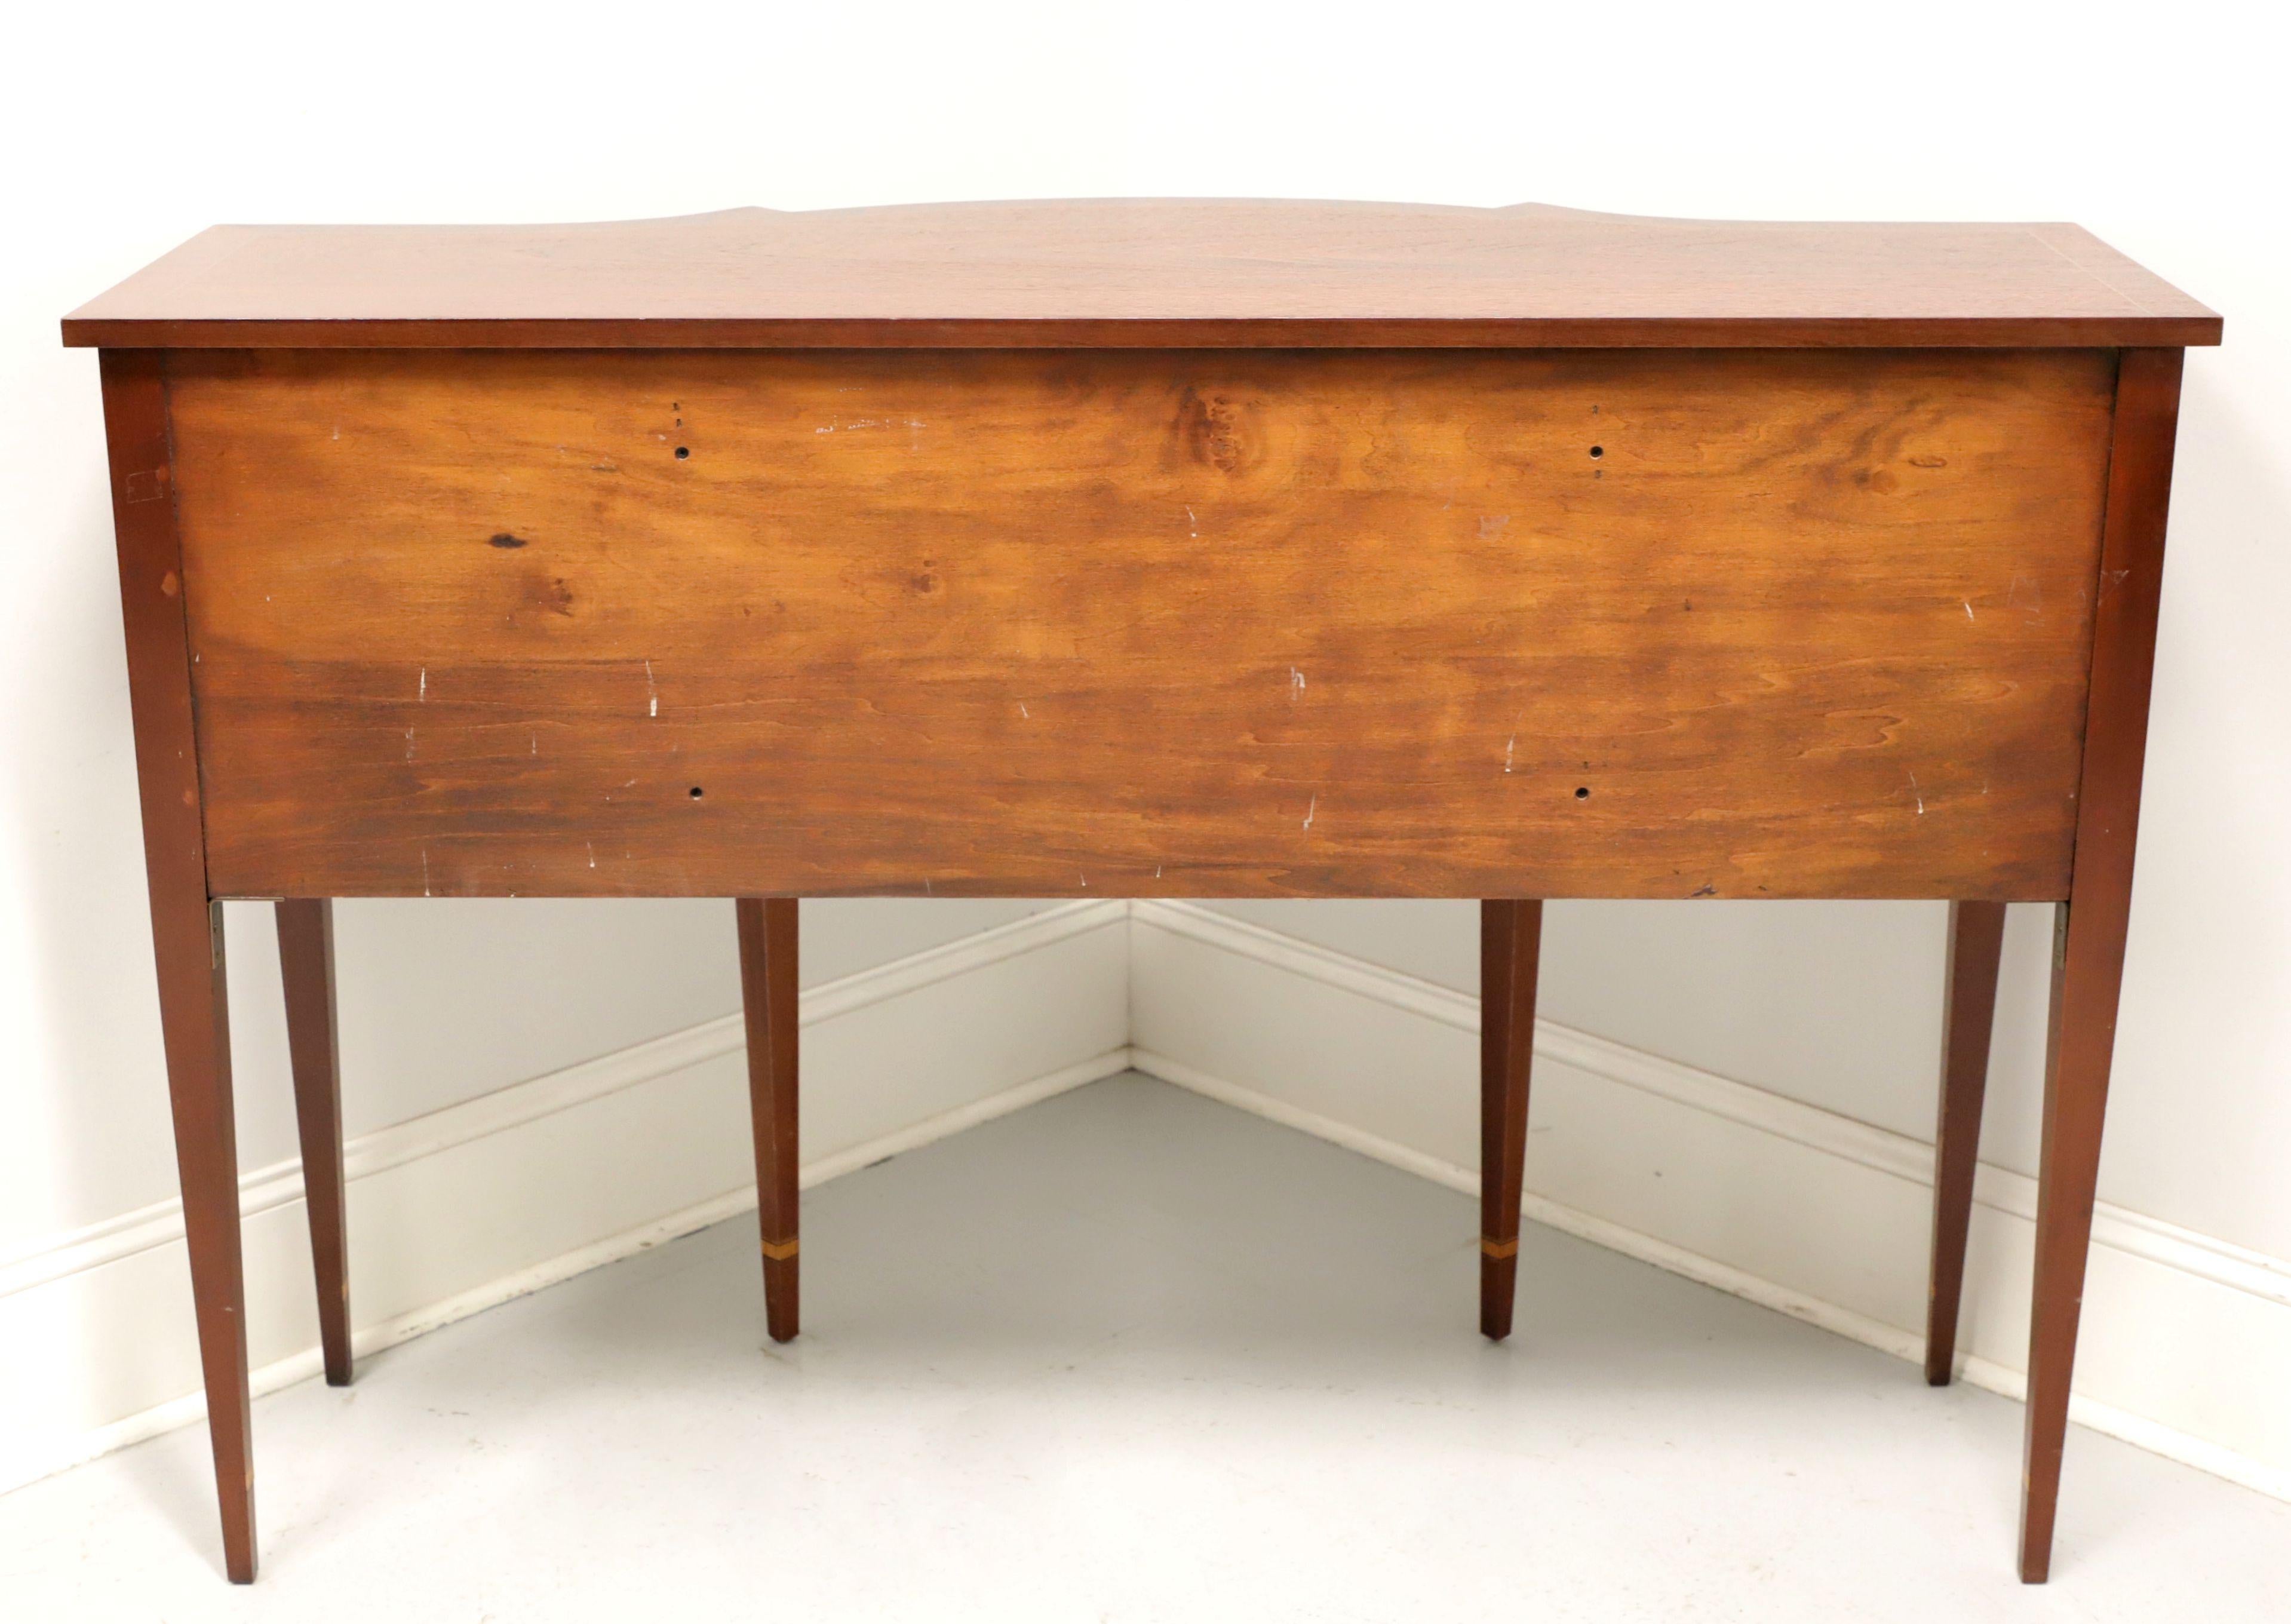 20th Century COUNCILL Inlaid Flame Mahogany Hepplewhite Sideboard